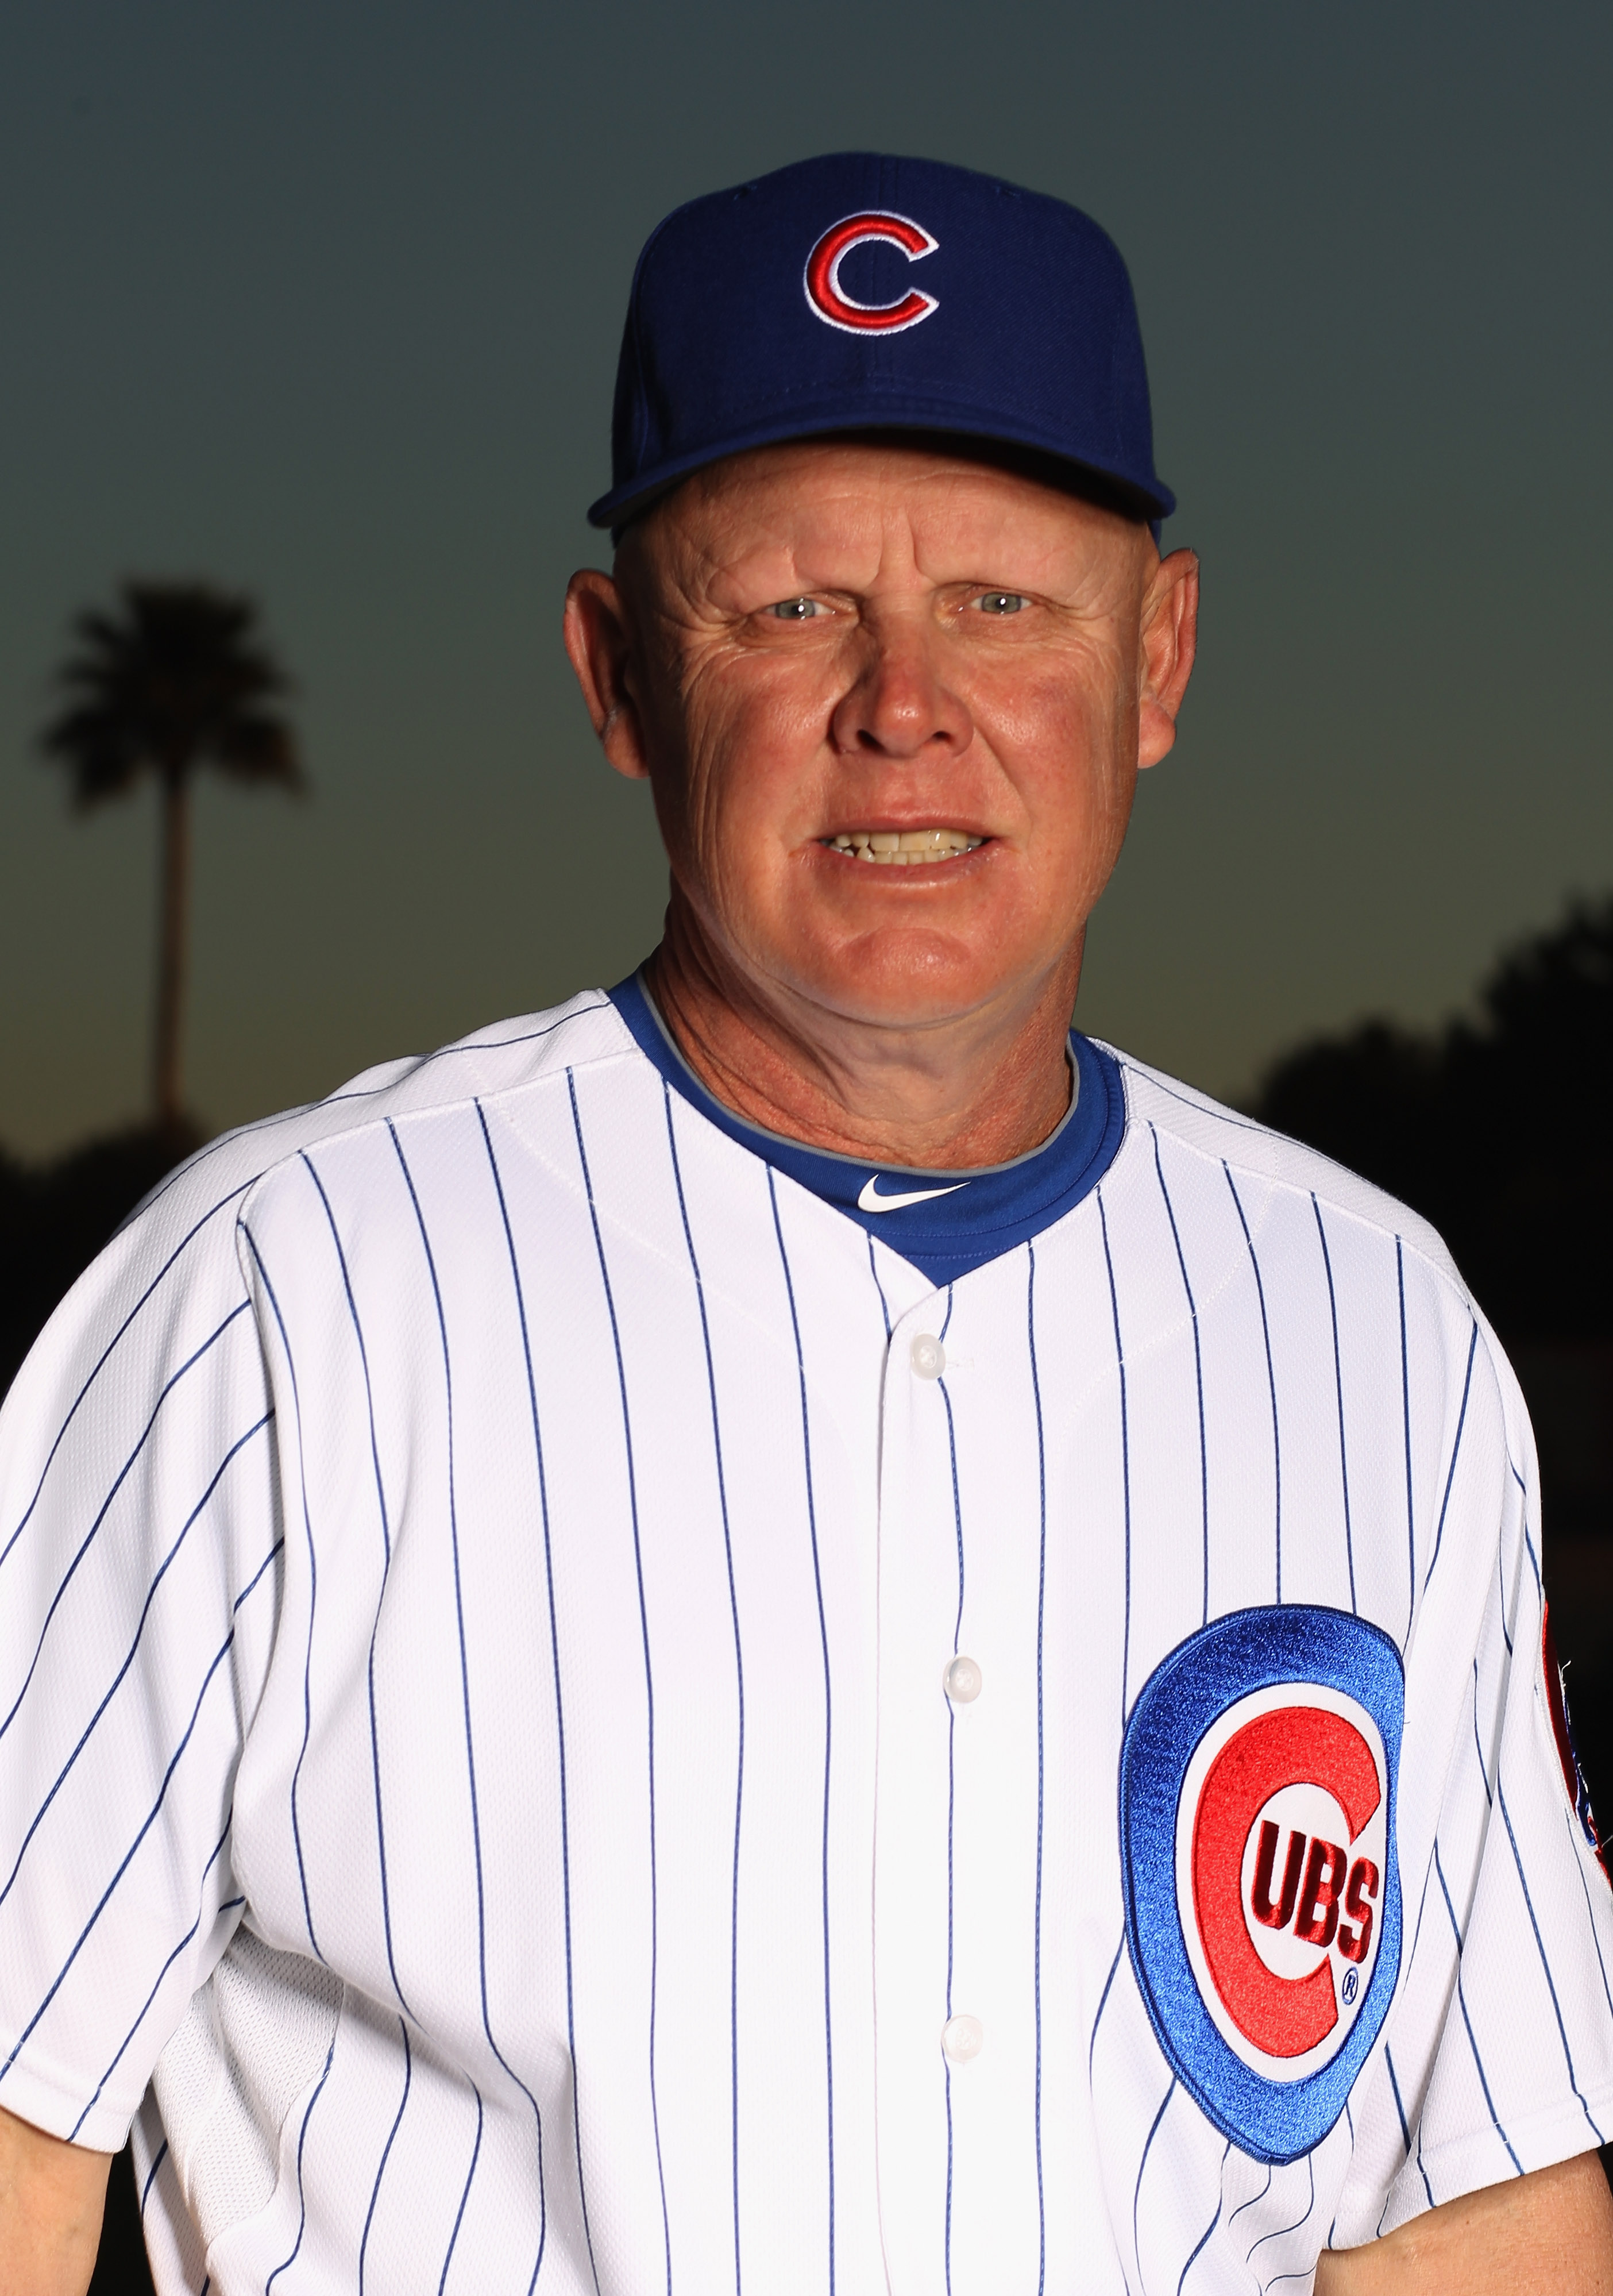 MESA, AZ - FEBRUARY 22:  Manager Mike Quade of the Chicago Cubs poses for a portrait during media photo day at Finch Park on February 22, 2011 in Mesa, Arizona.  (Photo by Ezra Shaw/Getty Images)